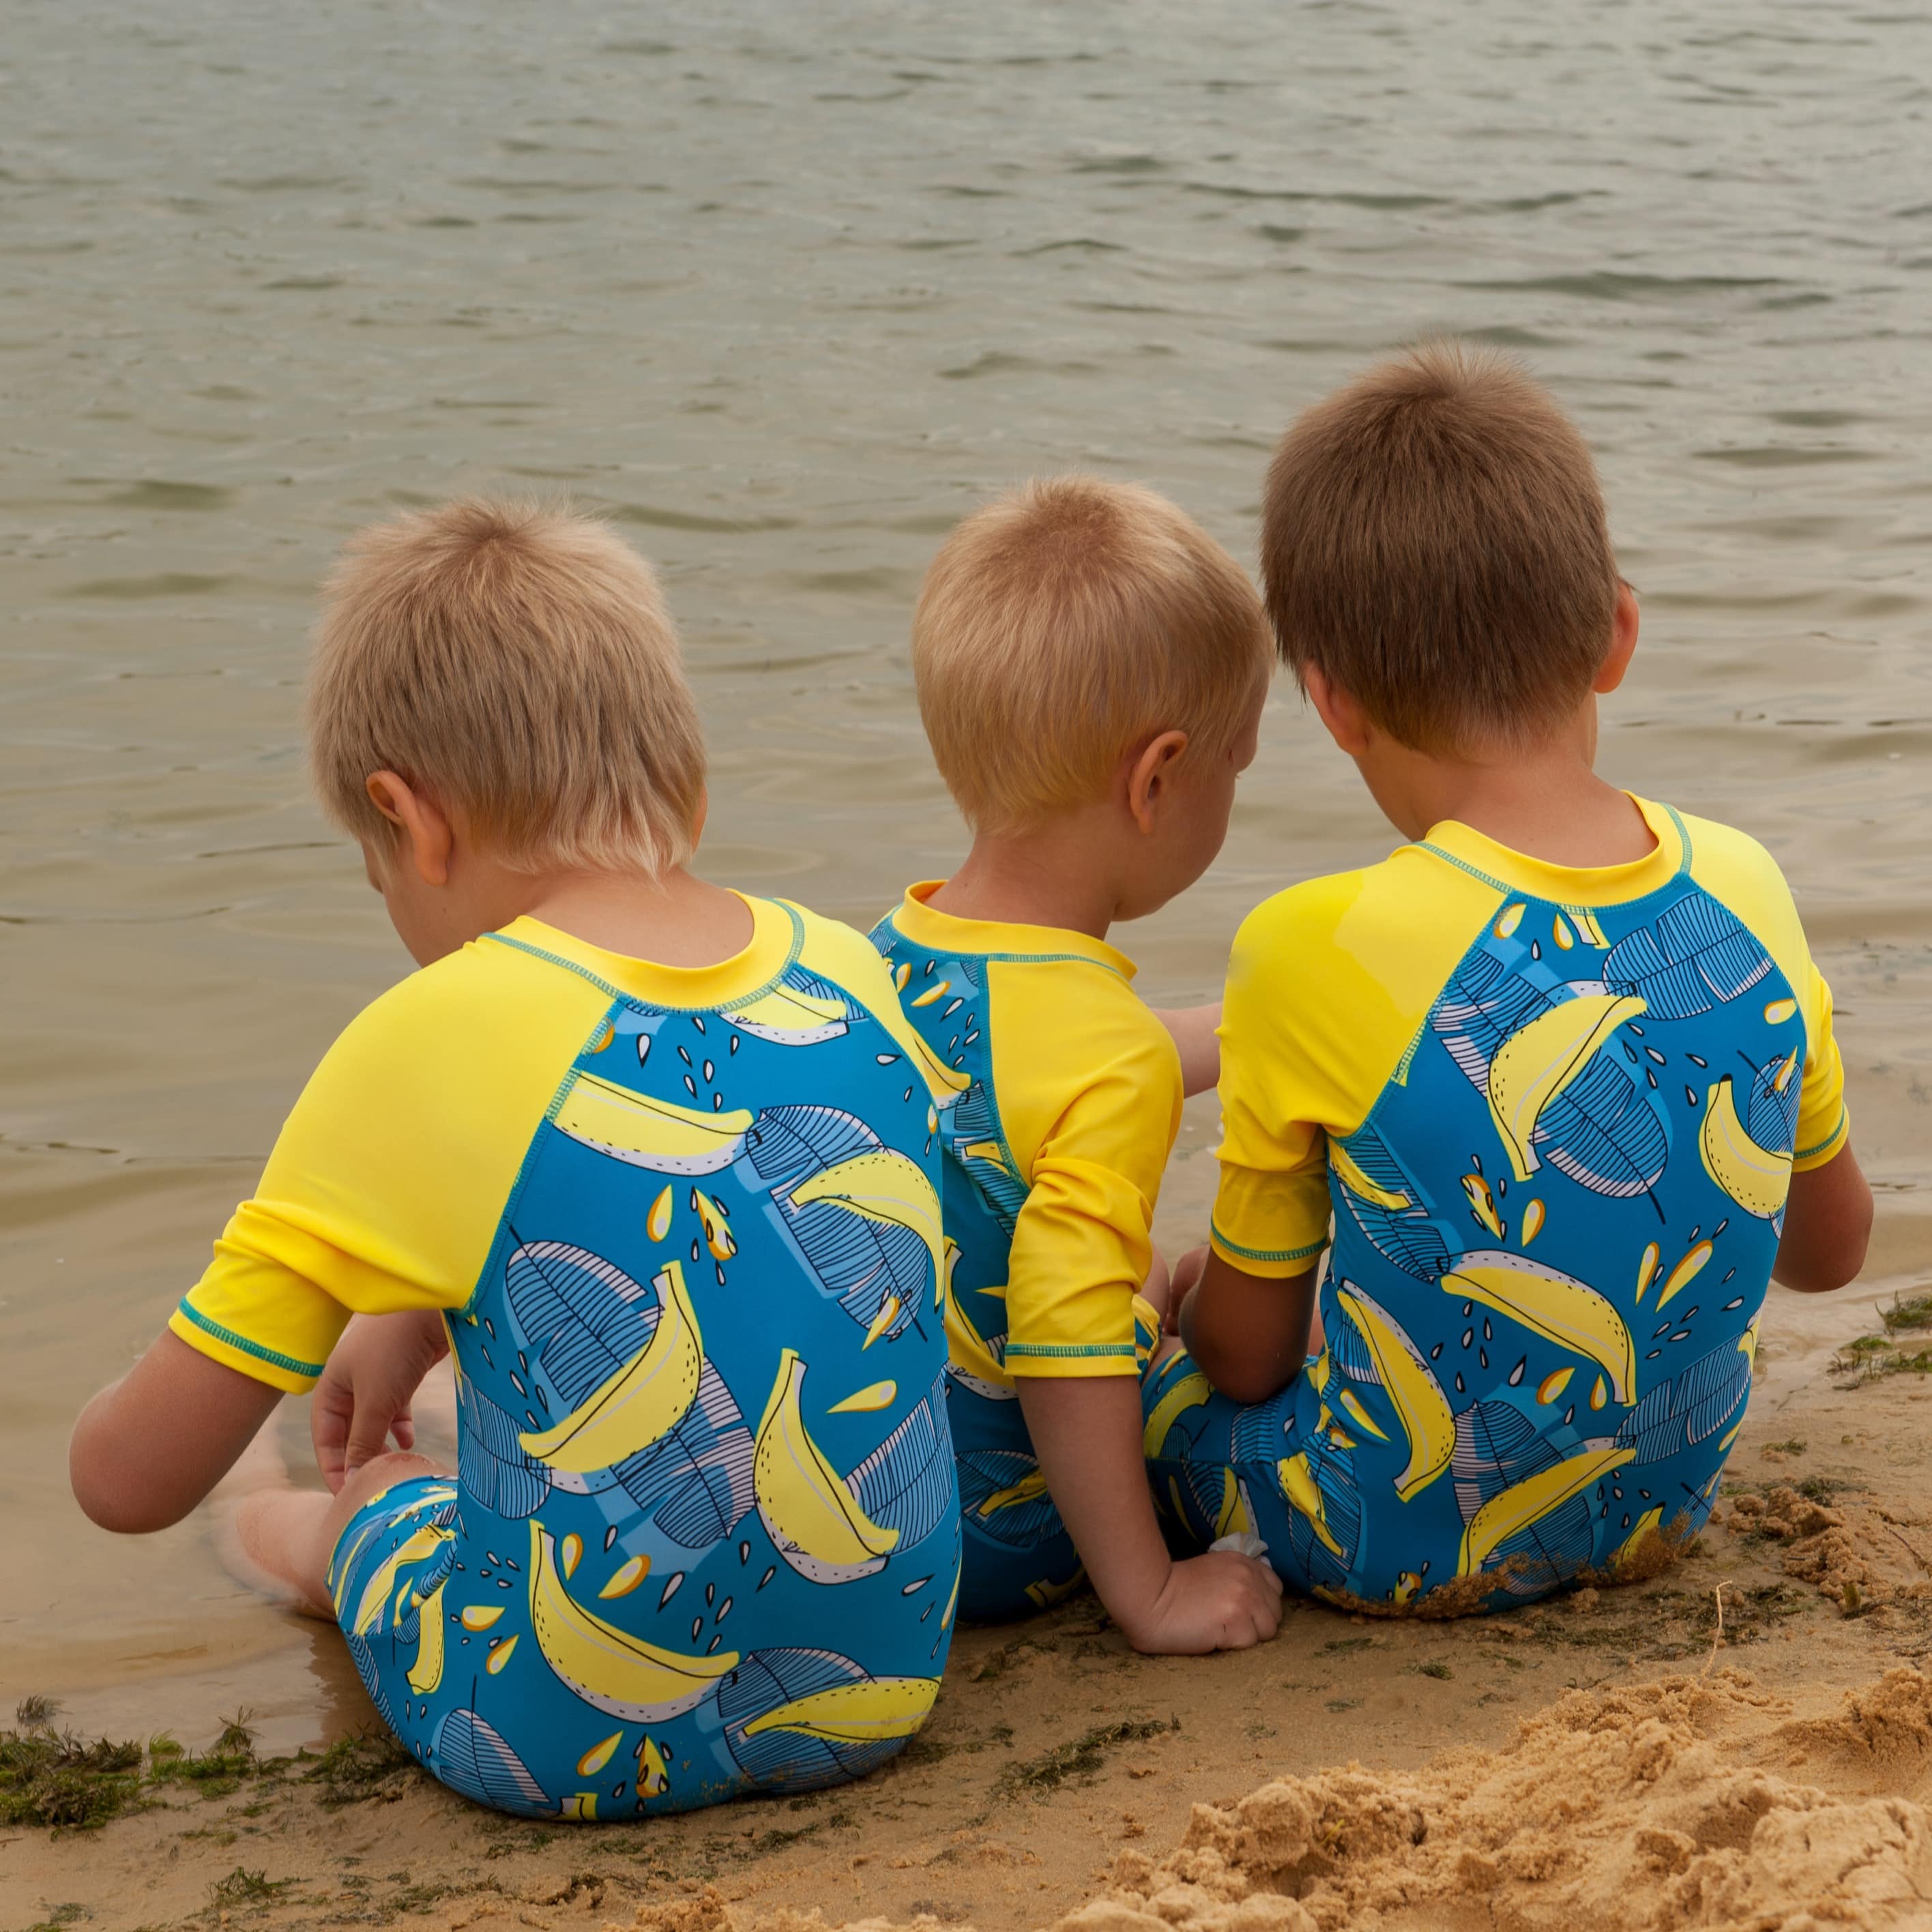 Three young boys dressed in matching swimwear sitting in sand by the river playing with their backs to the camera